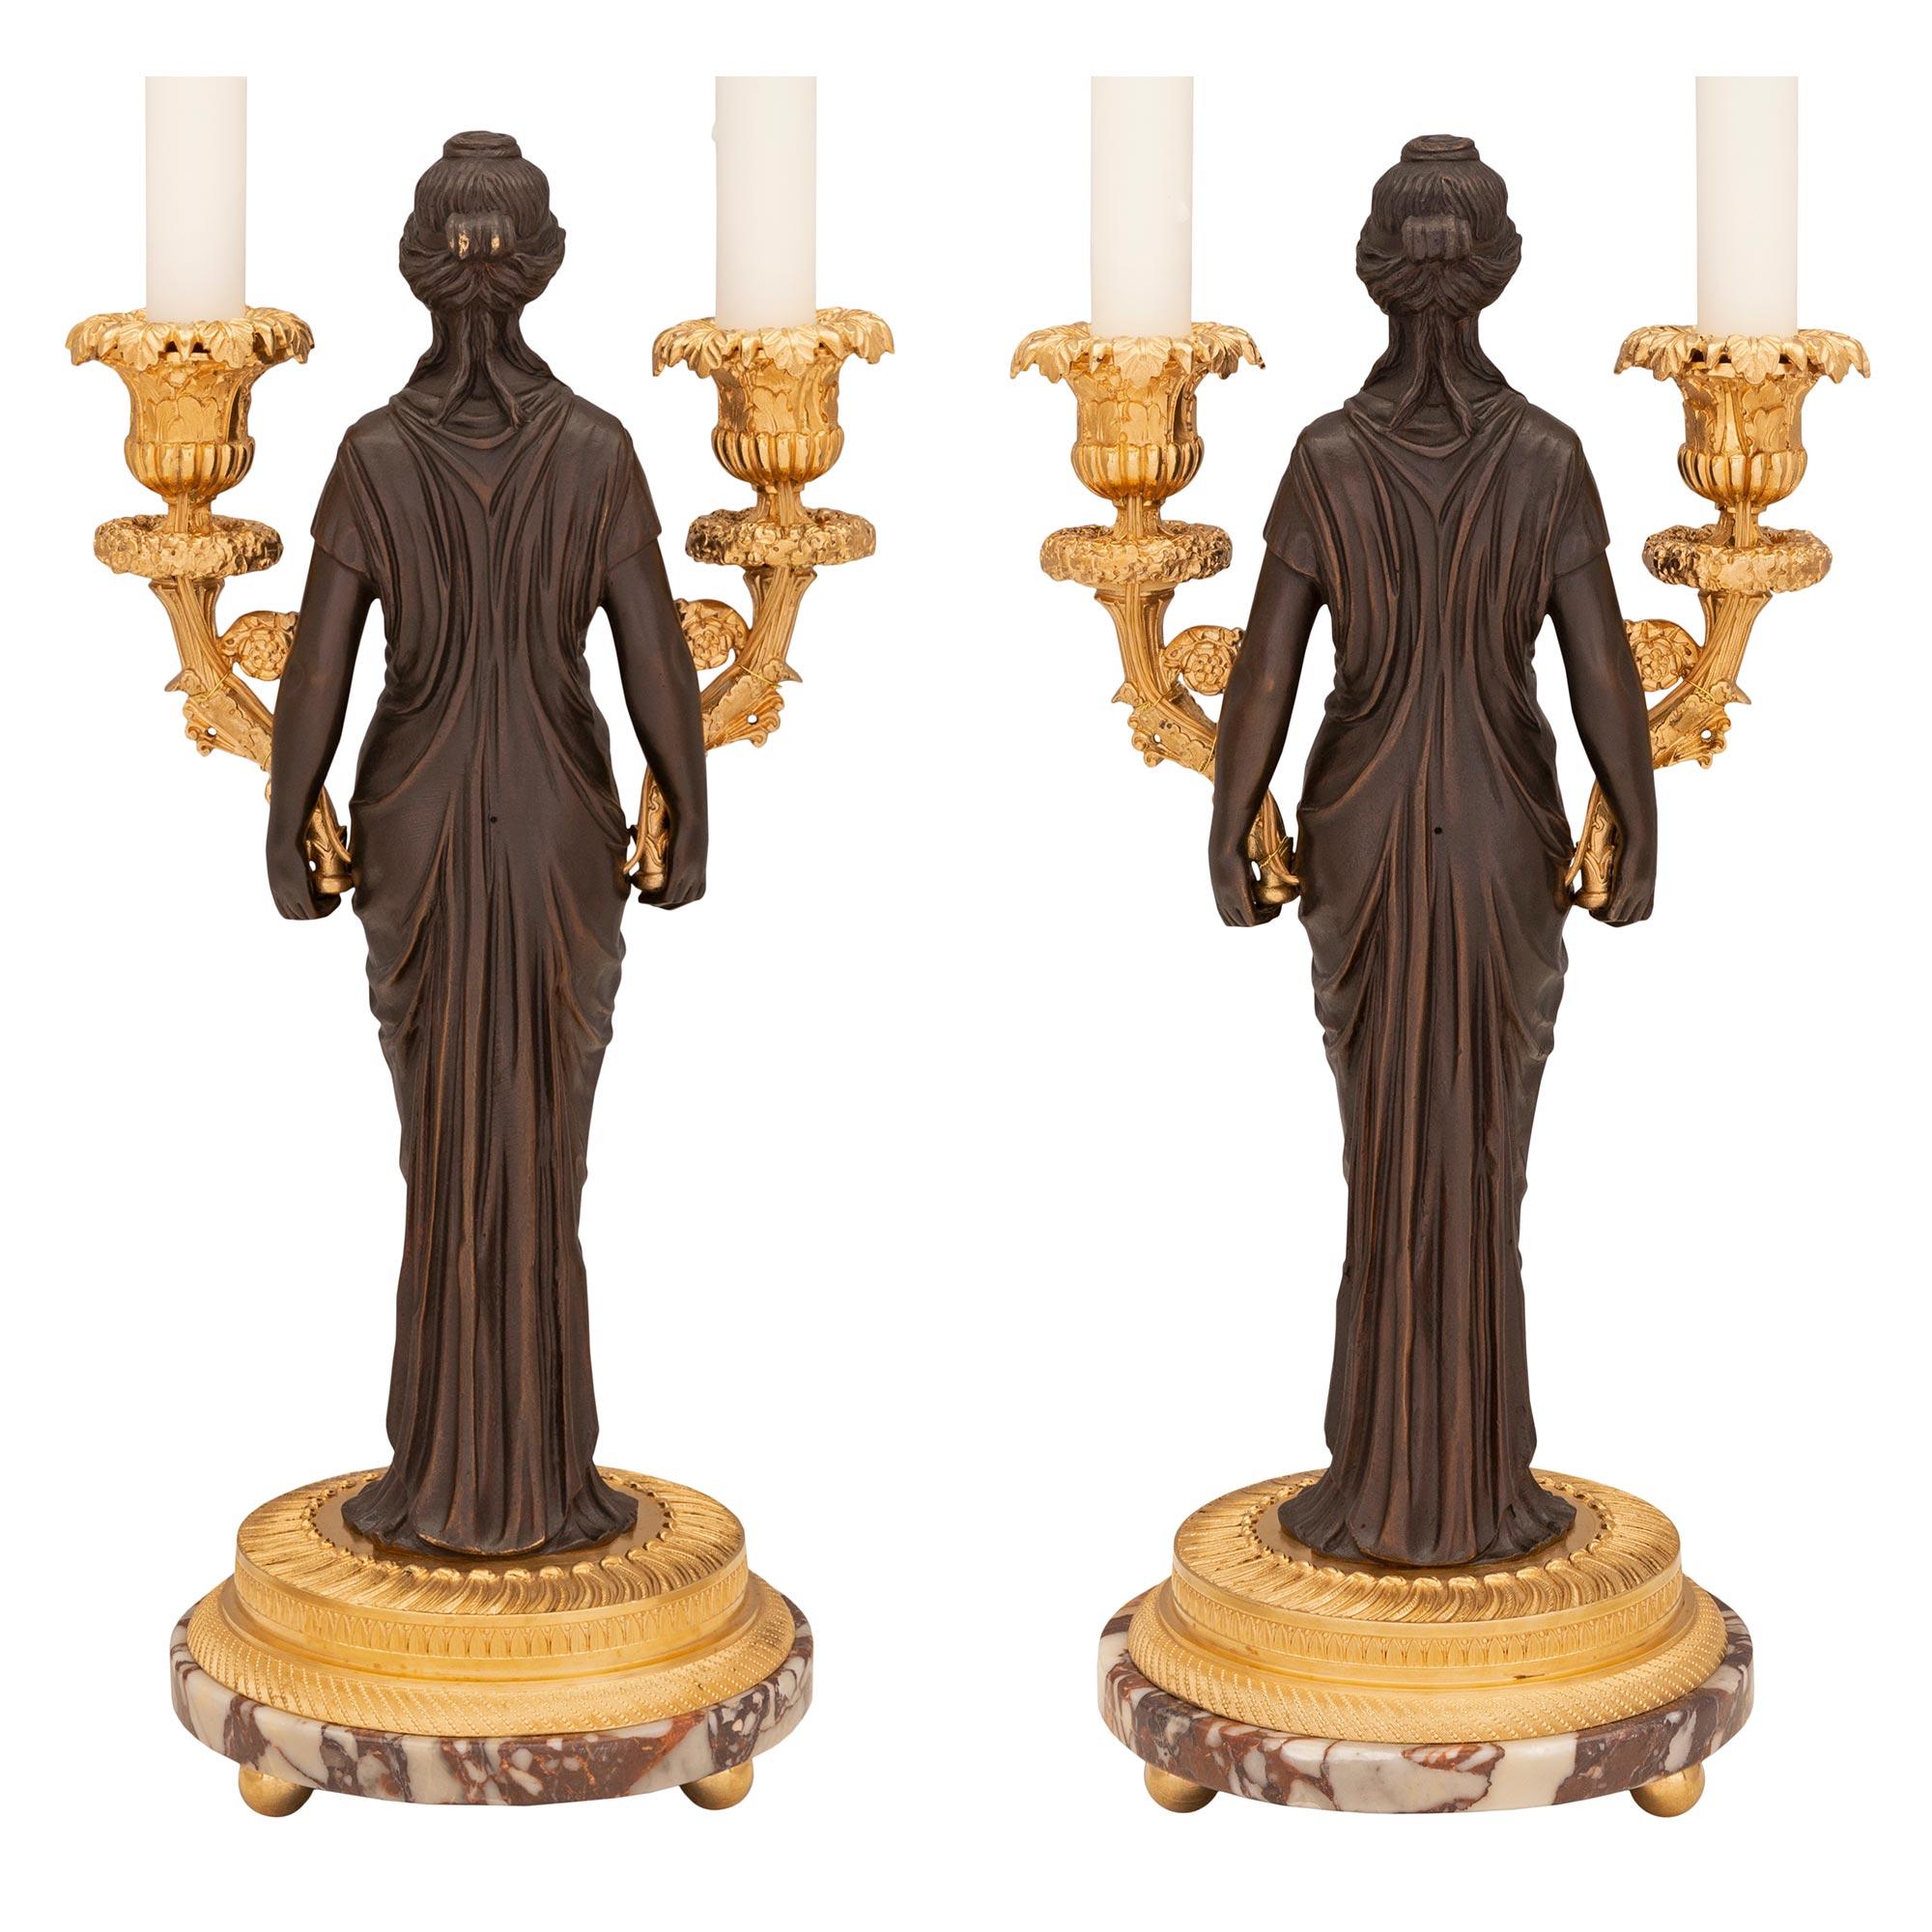 A striking pair of French 19th century neo-classical st. patinated bronze, ormolu and Brèche de Appenninica marble candelabra lamps. Each two armed lamp is raised by a beautiful circular Brèche de Appenninica marble base with fine ormolu ball feet